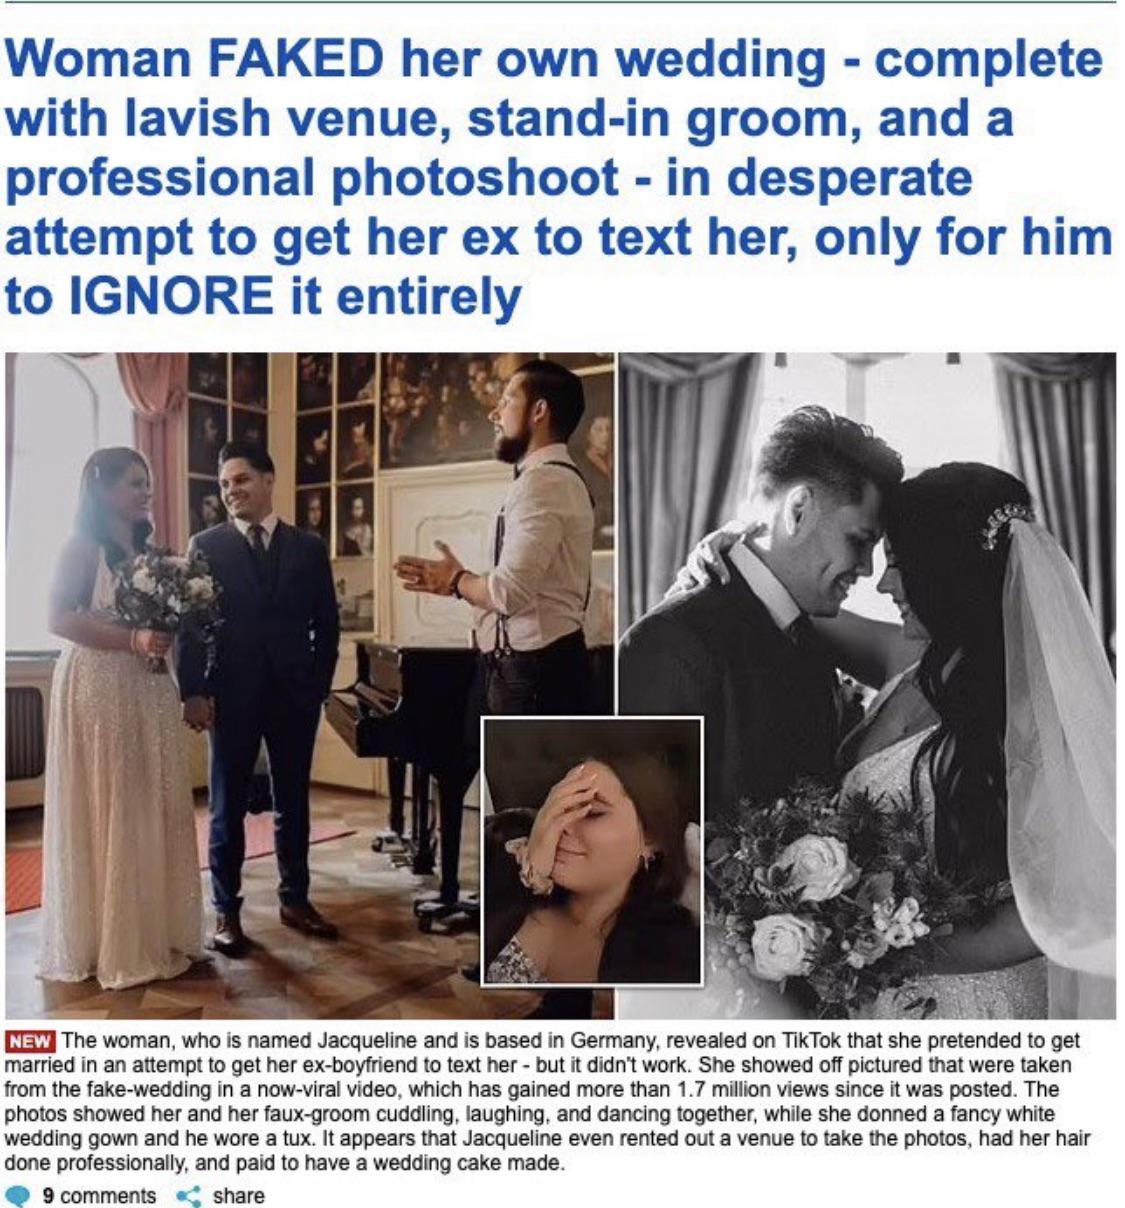 cringe pics - presentation - Woman Faked her own wedding complete with lavish venue, standin groom, and a professional photoshoot in desperate attempt to get her ex to text her, only for him to Ignore it entirely New The woman, who is named Jacqueline and